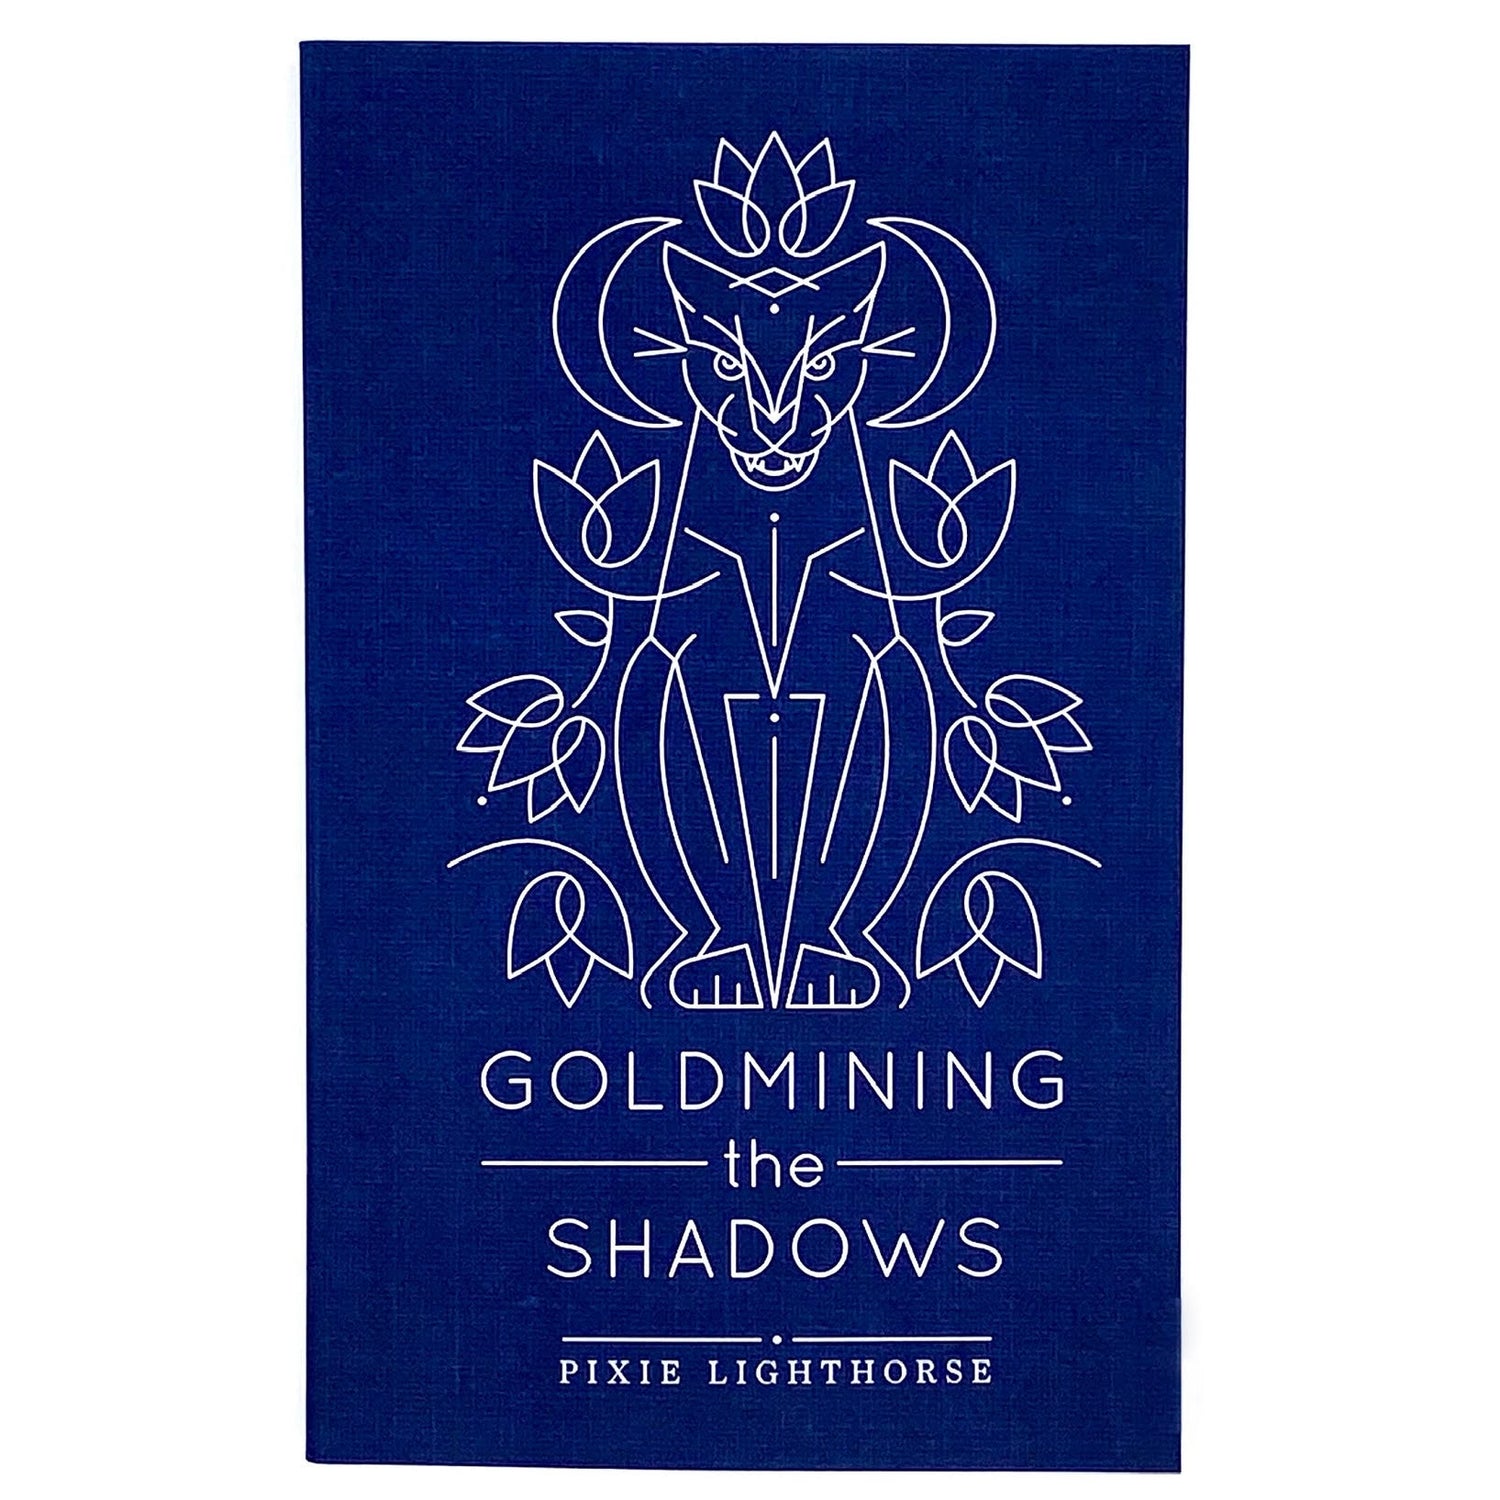 Book cover of Goldmining the Shadows by Pixie Lighthorse.